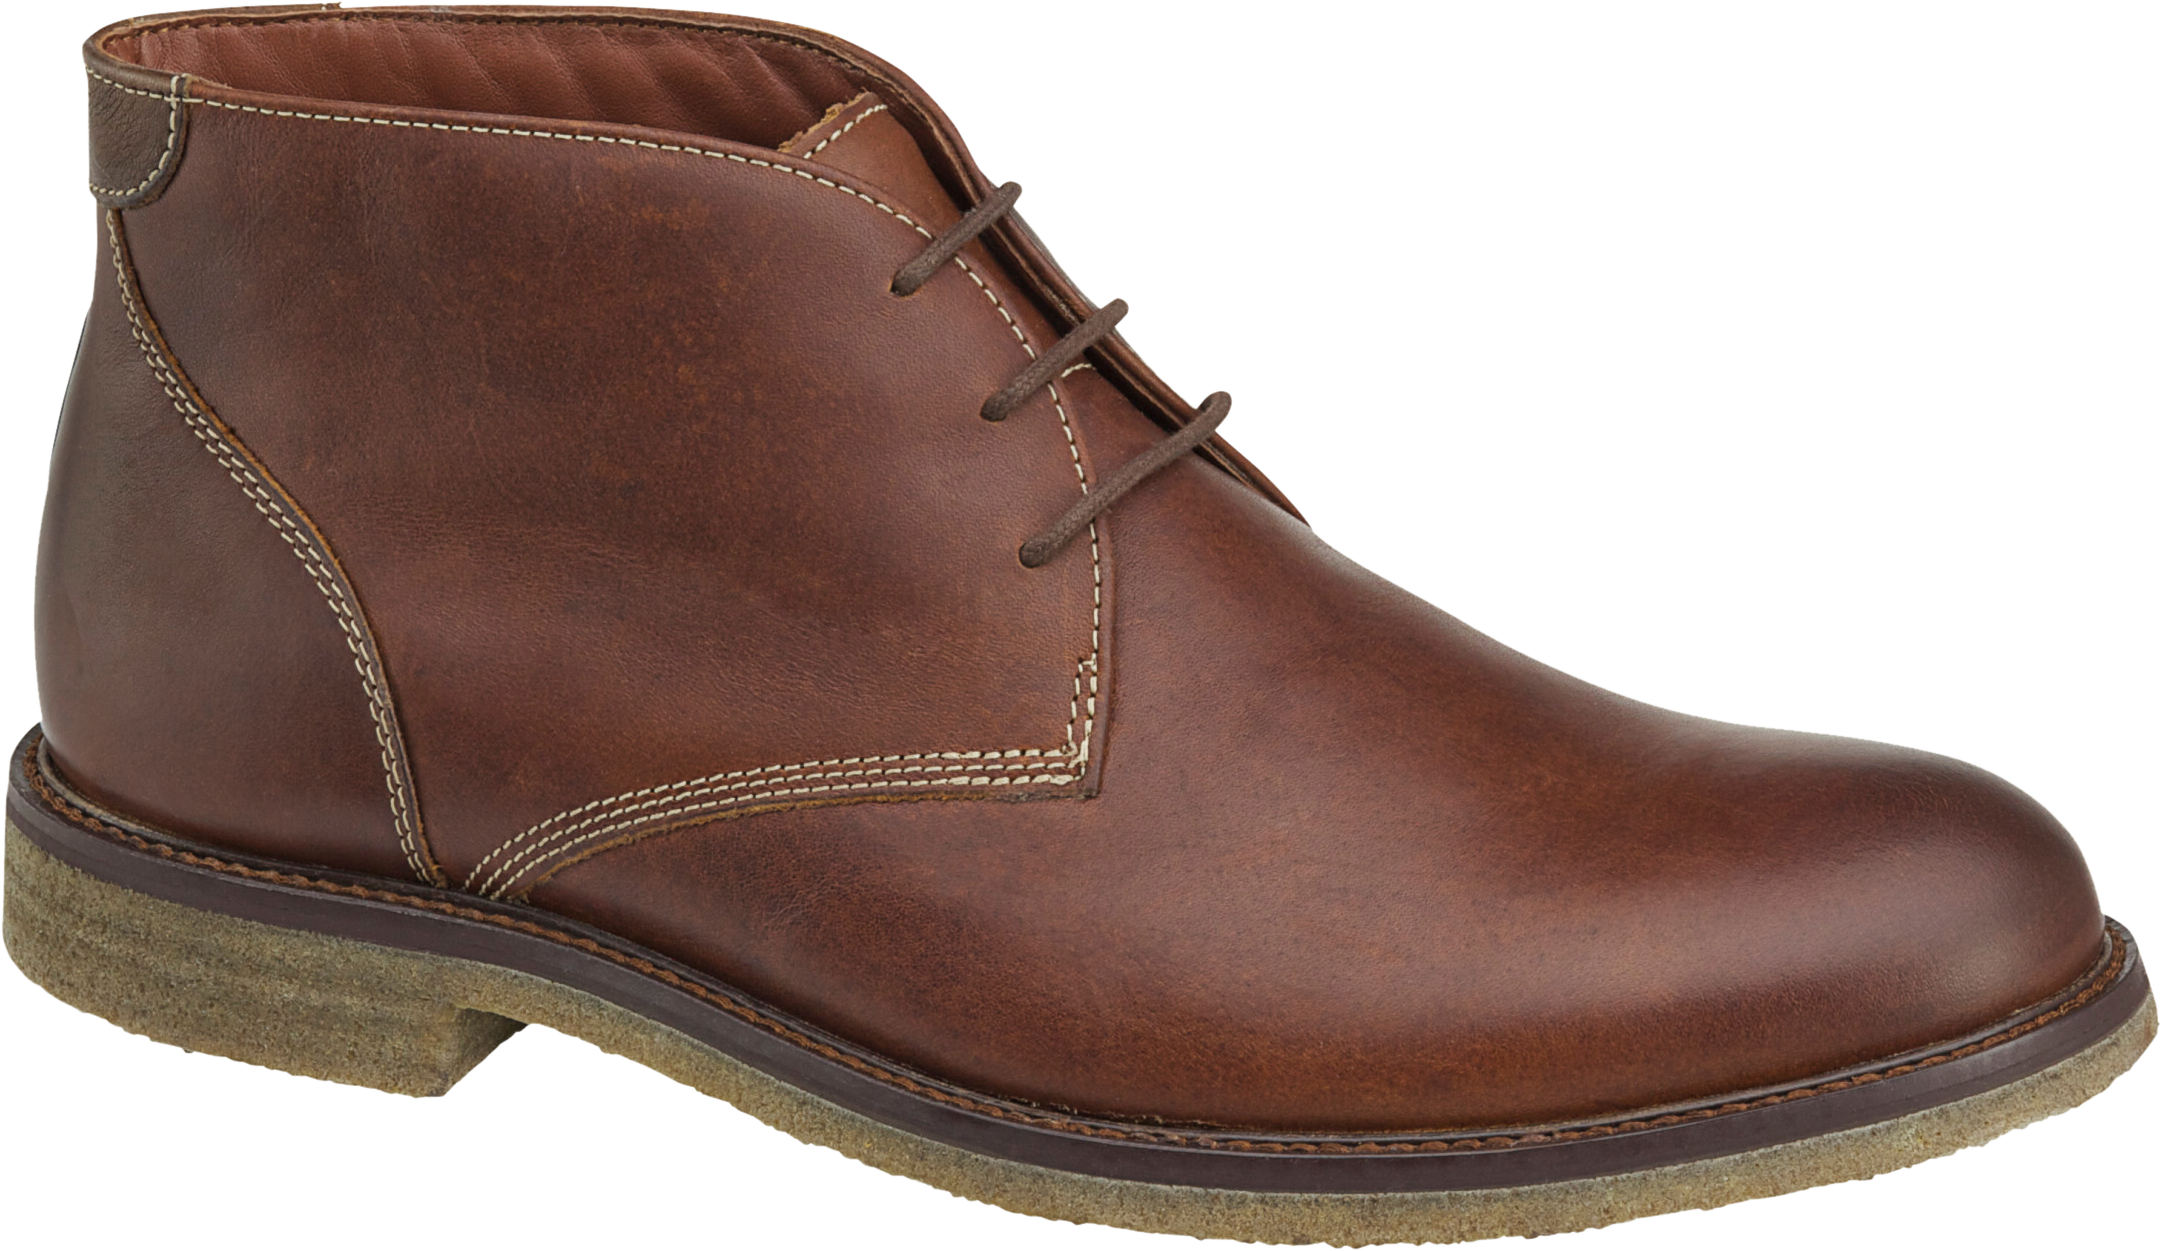 johnston and murphy boots on sale